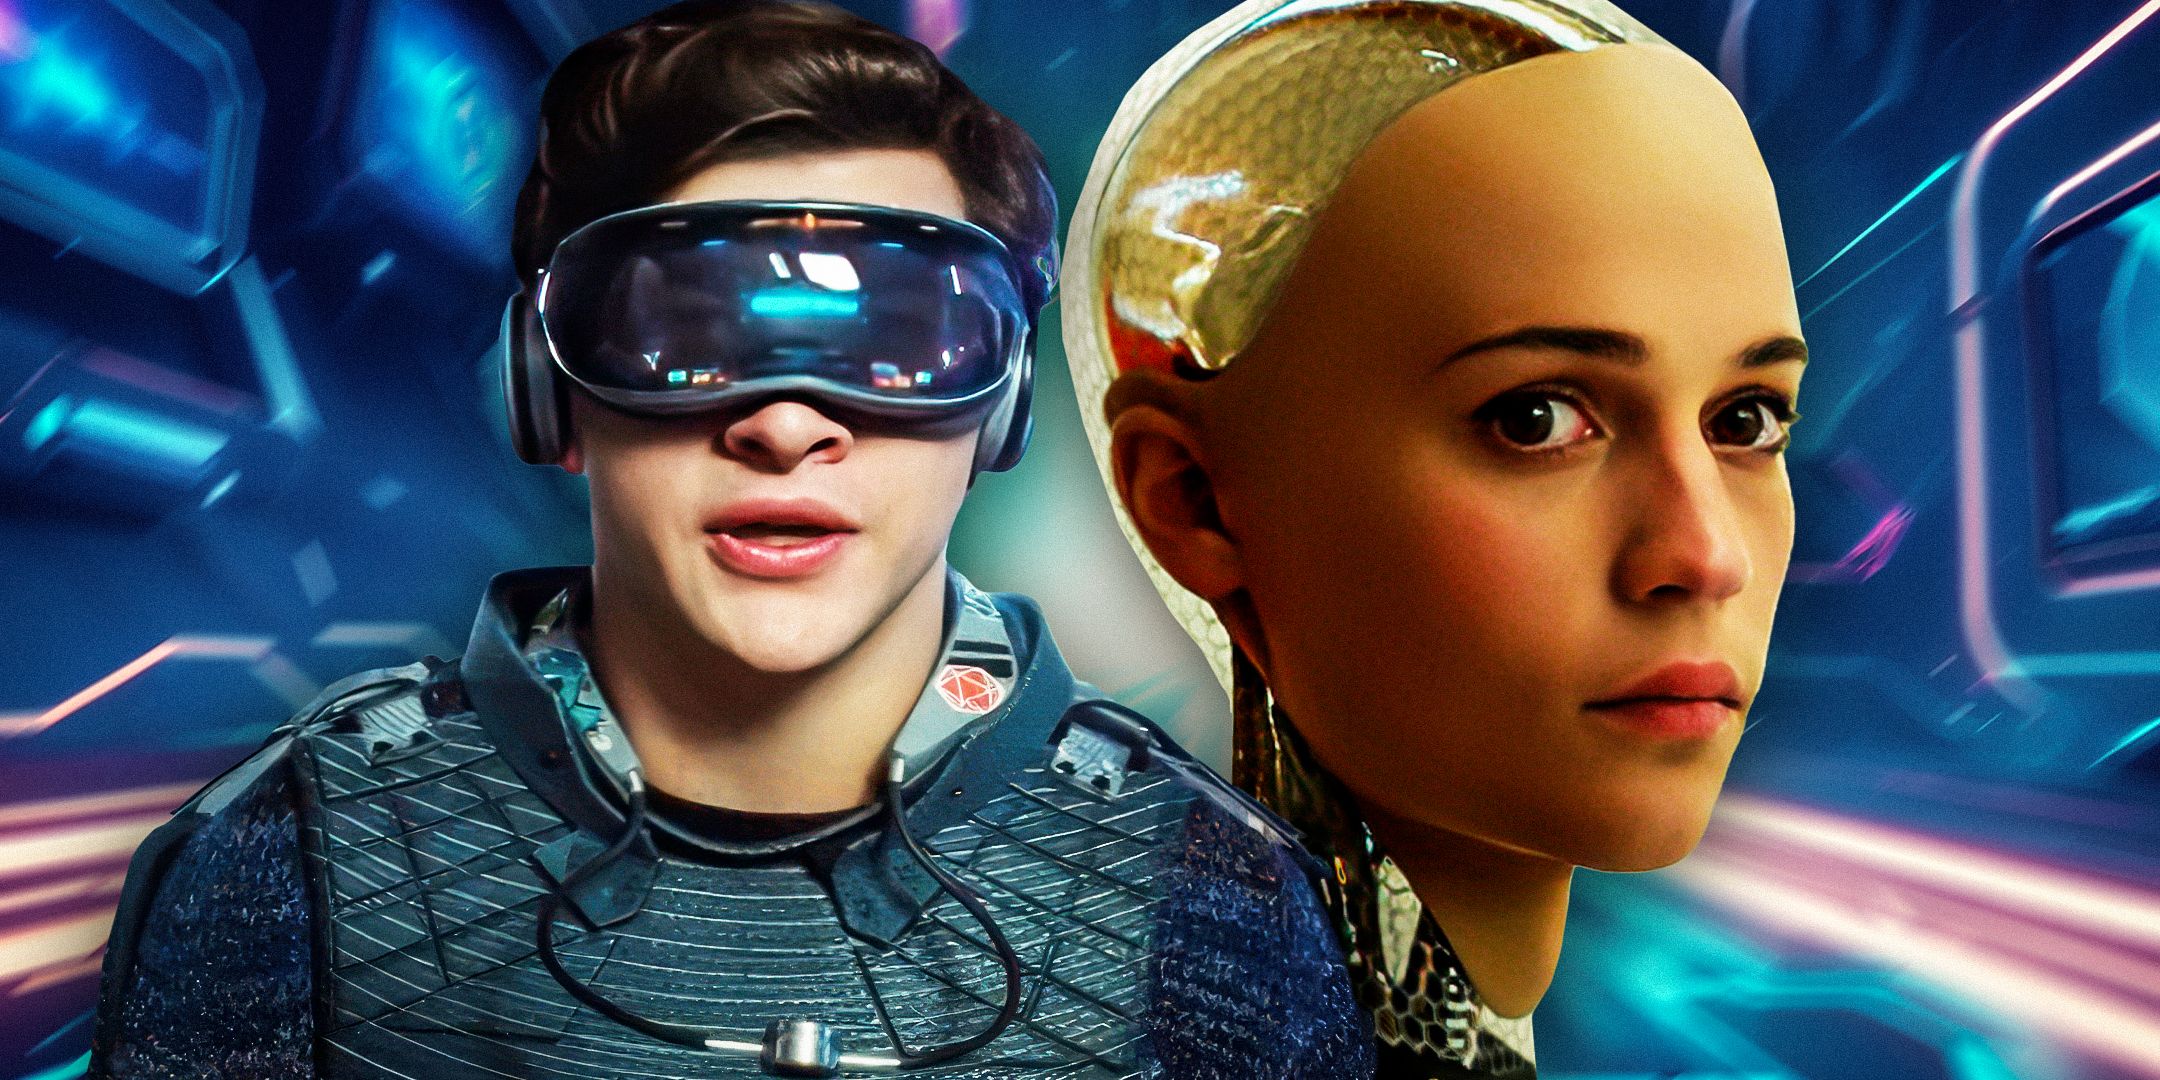 (Tye-Sheridan-as-Parzival-Wade)-from-Ready-Player-one-and-(Alicia-Vikander-as-Ava)-from-Ex-Machina